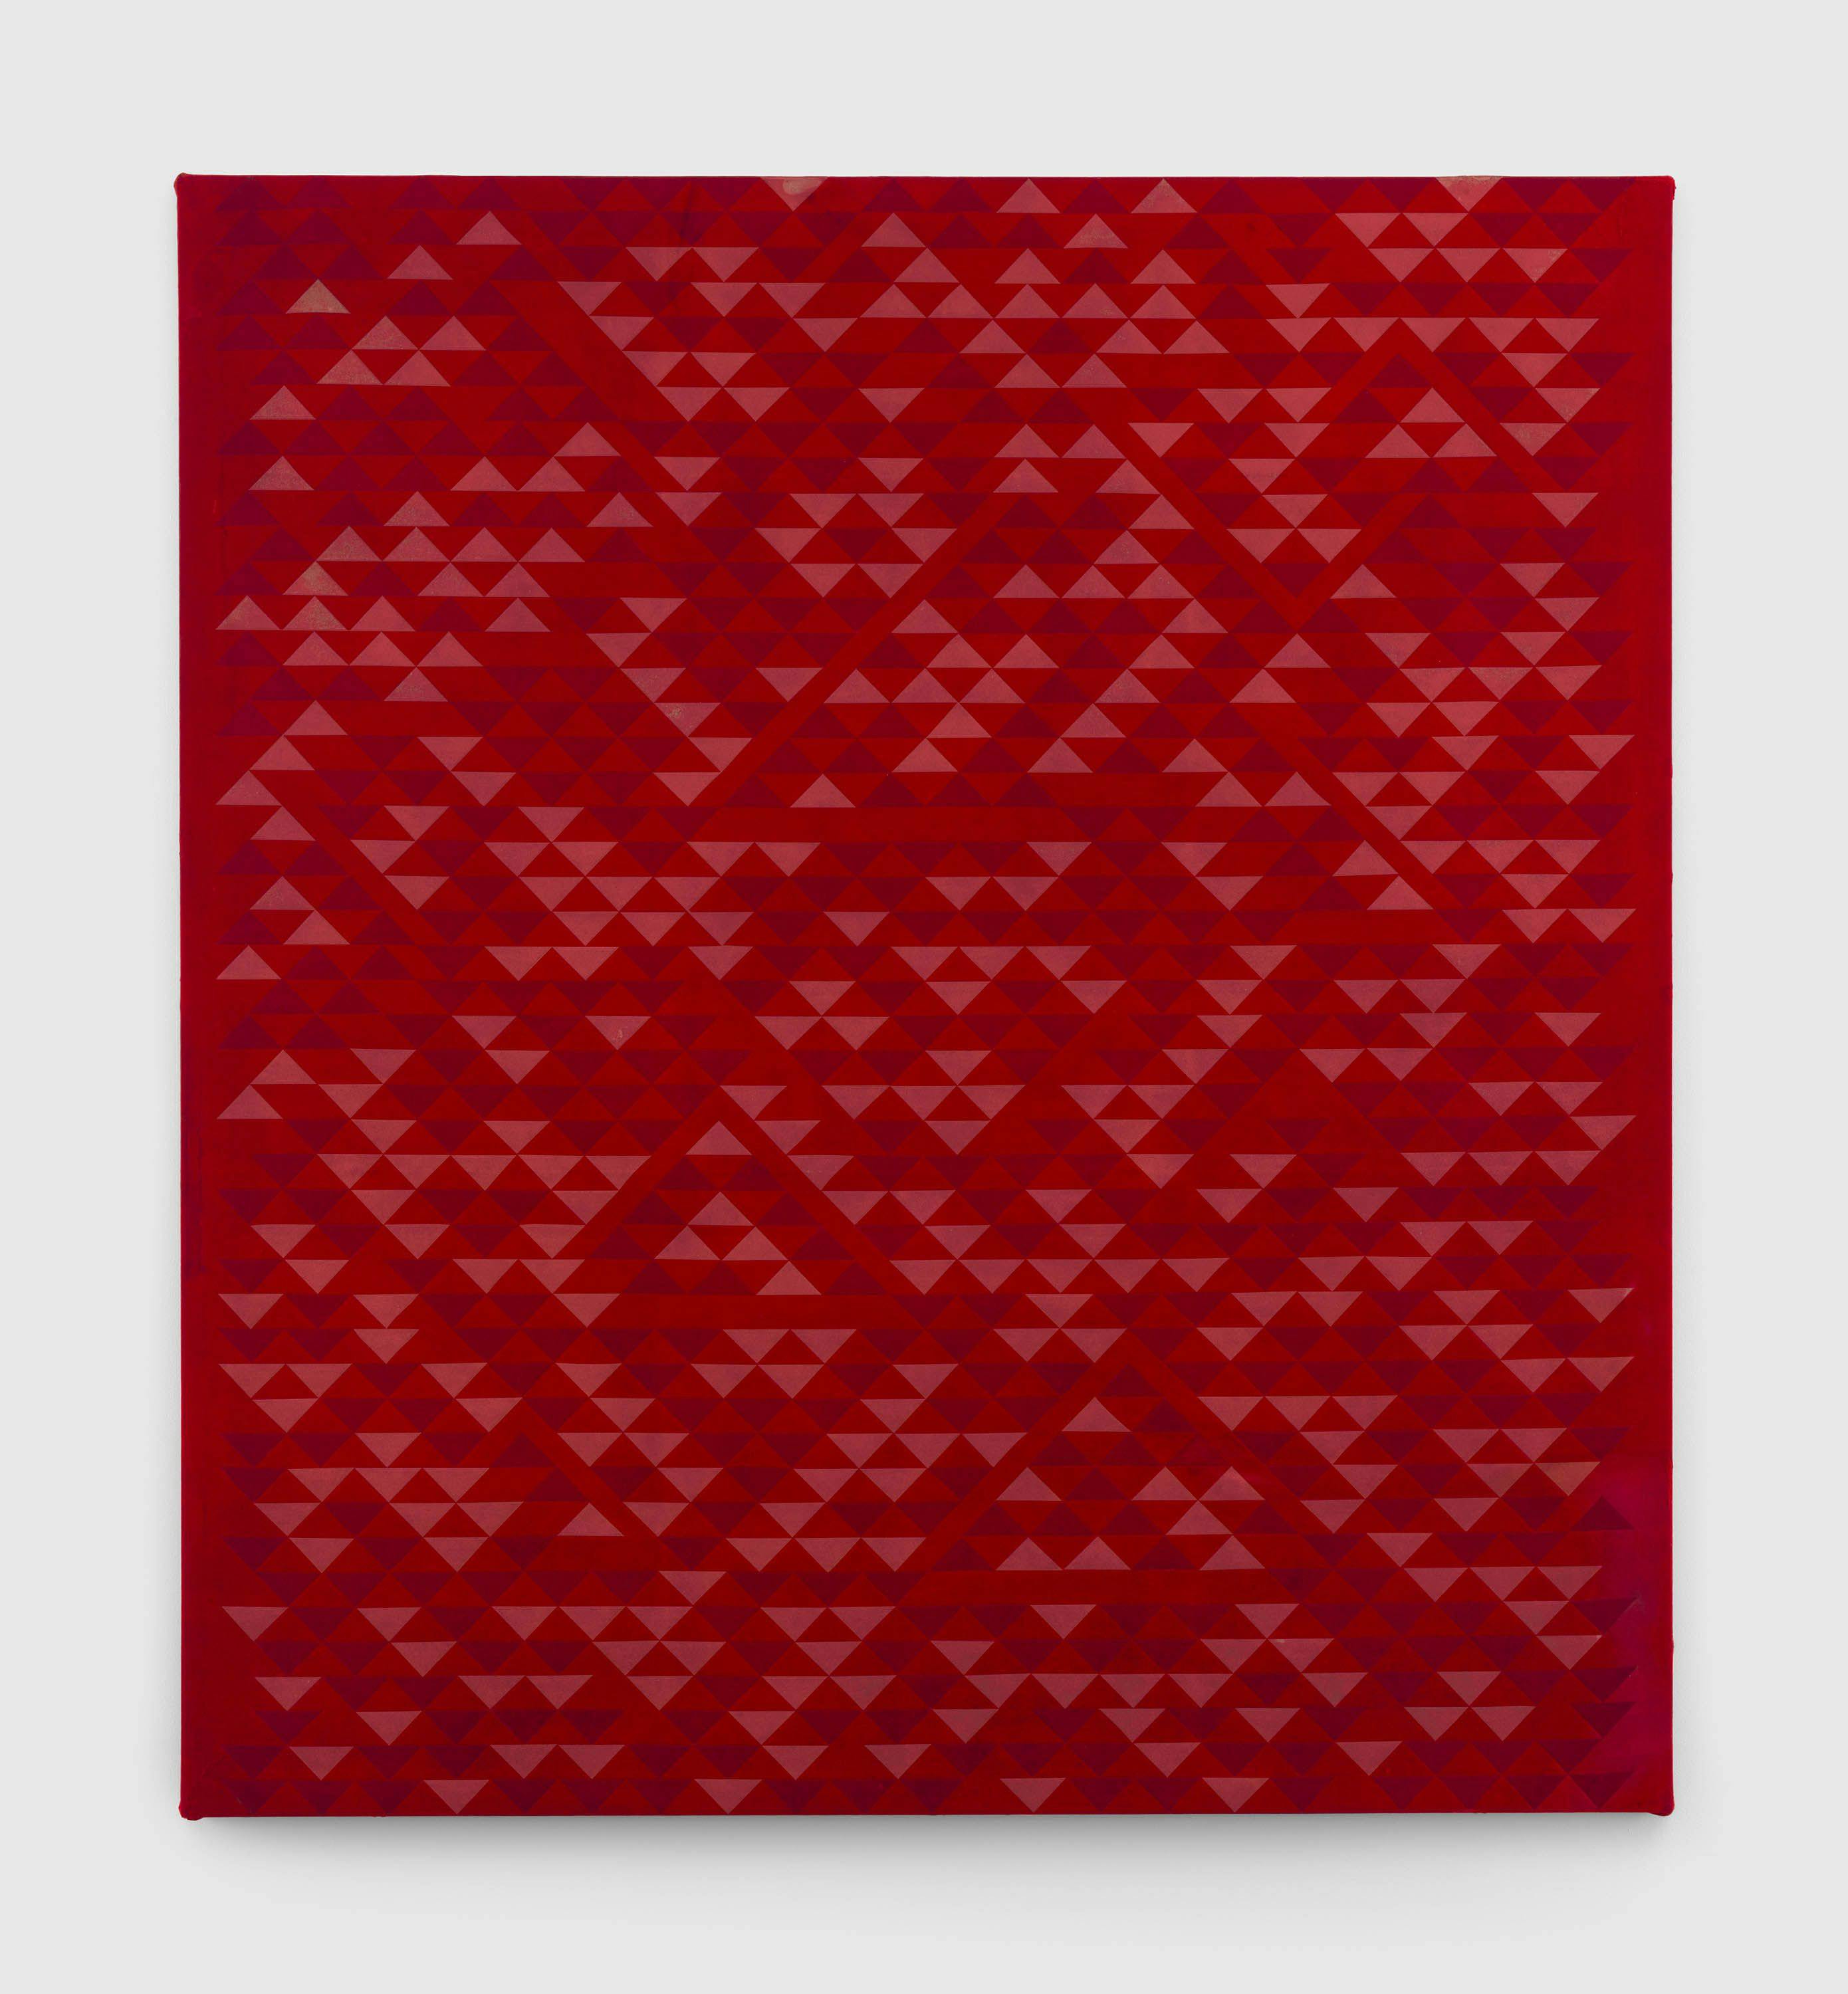 A textile by Anni Albers, titled Camino Real, dated 1968.